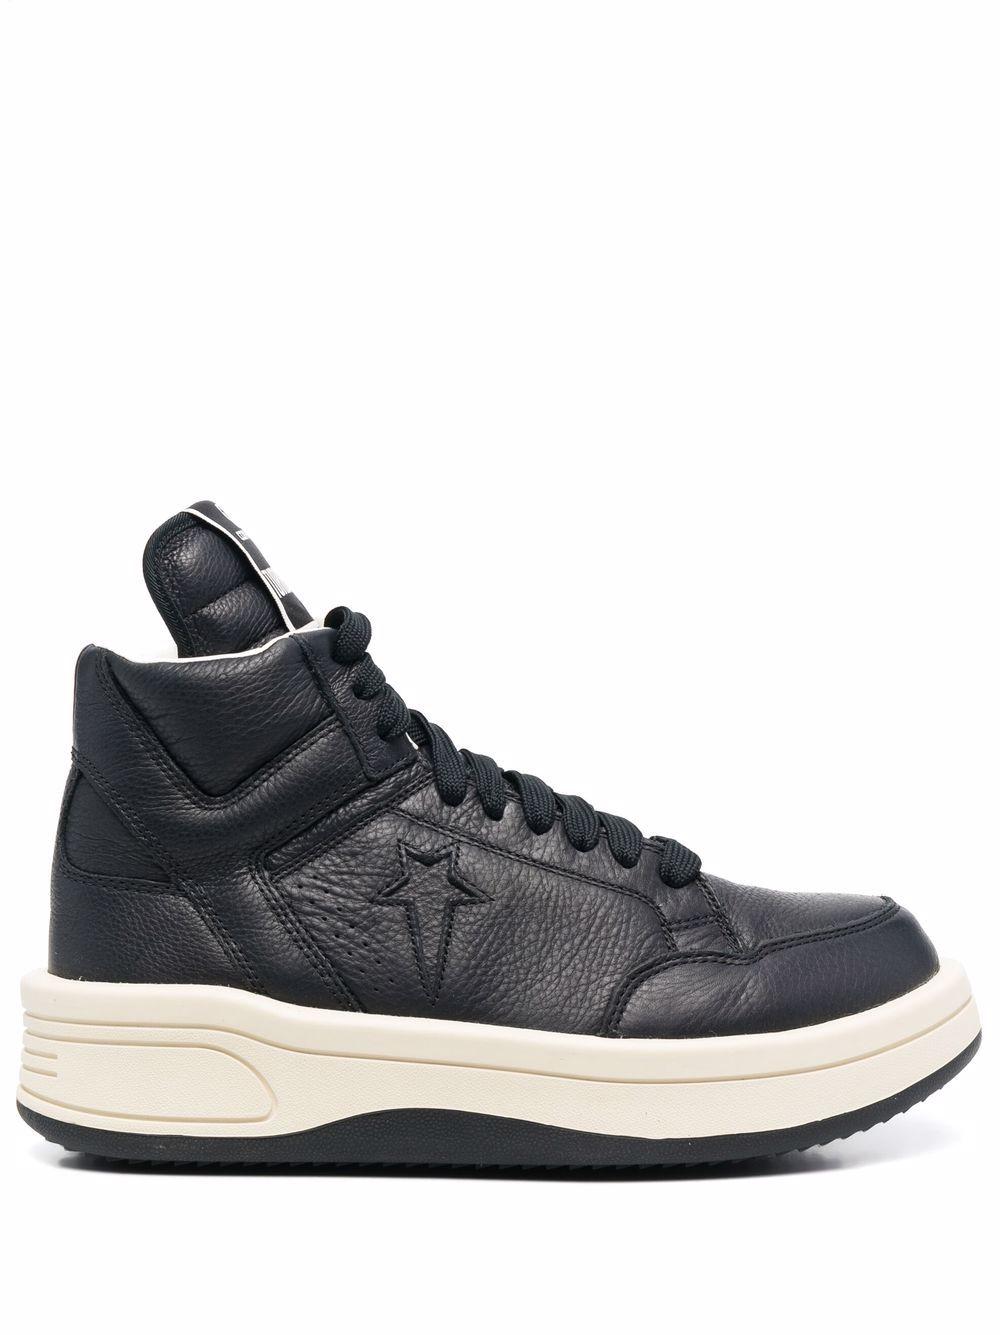 Rick Owens DRKSHDW X Converse Turbowpn Lace-up Sneakers 